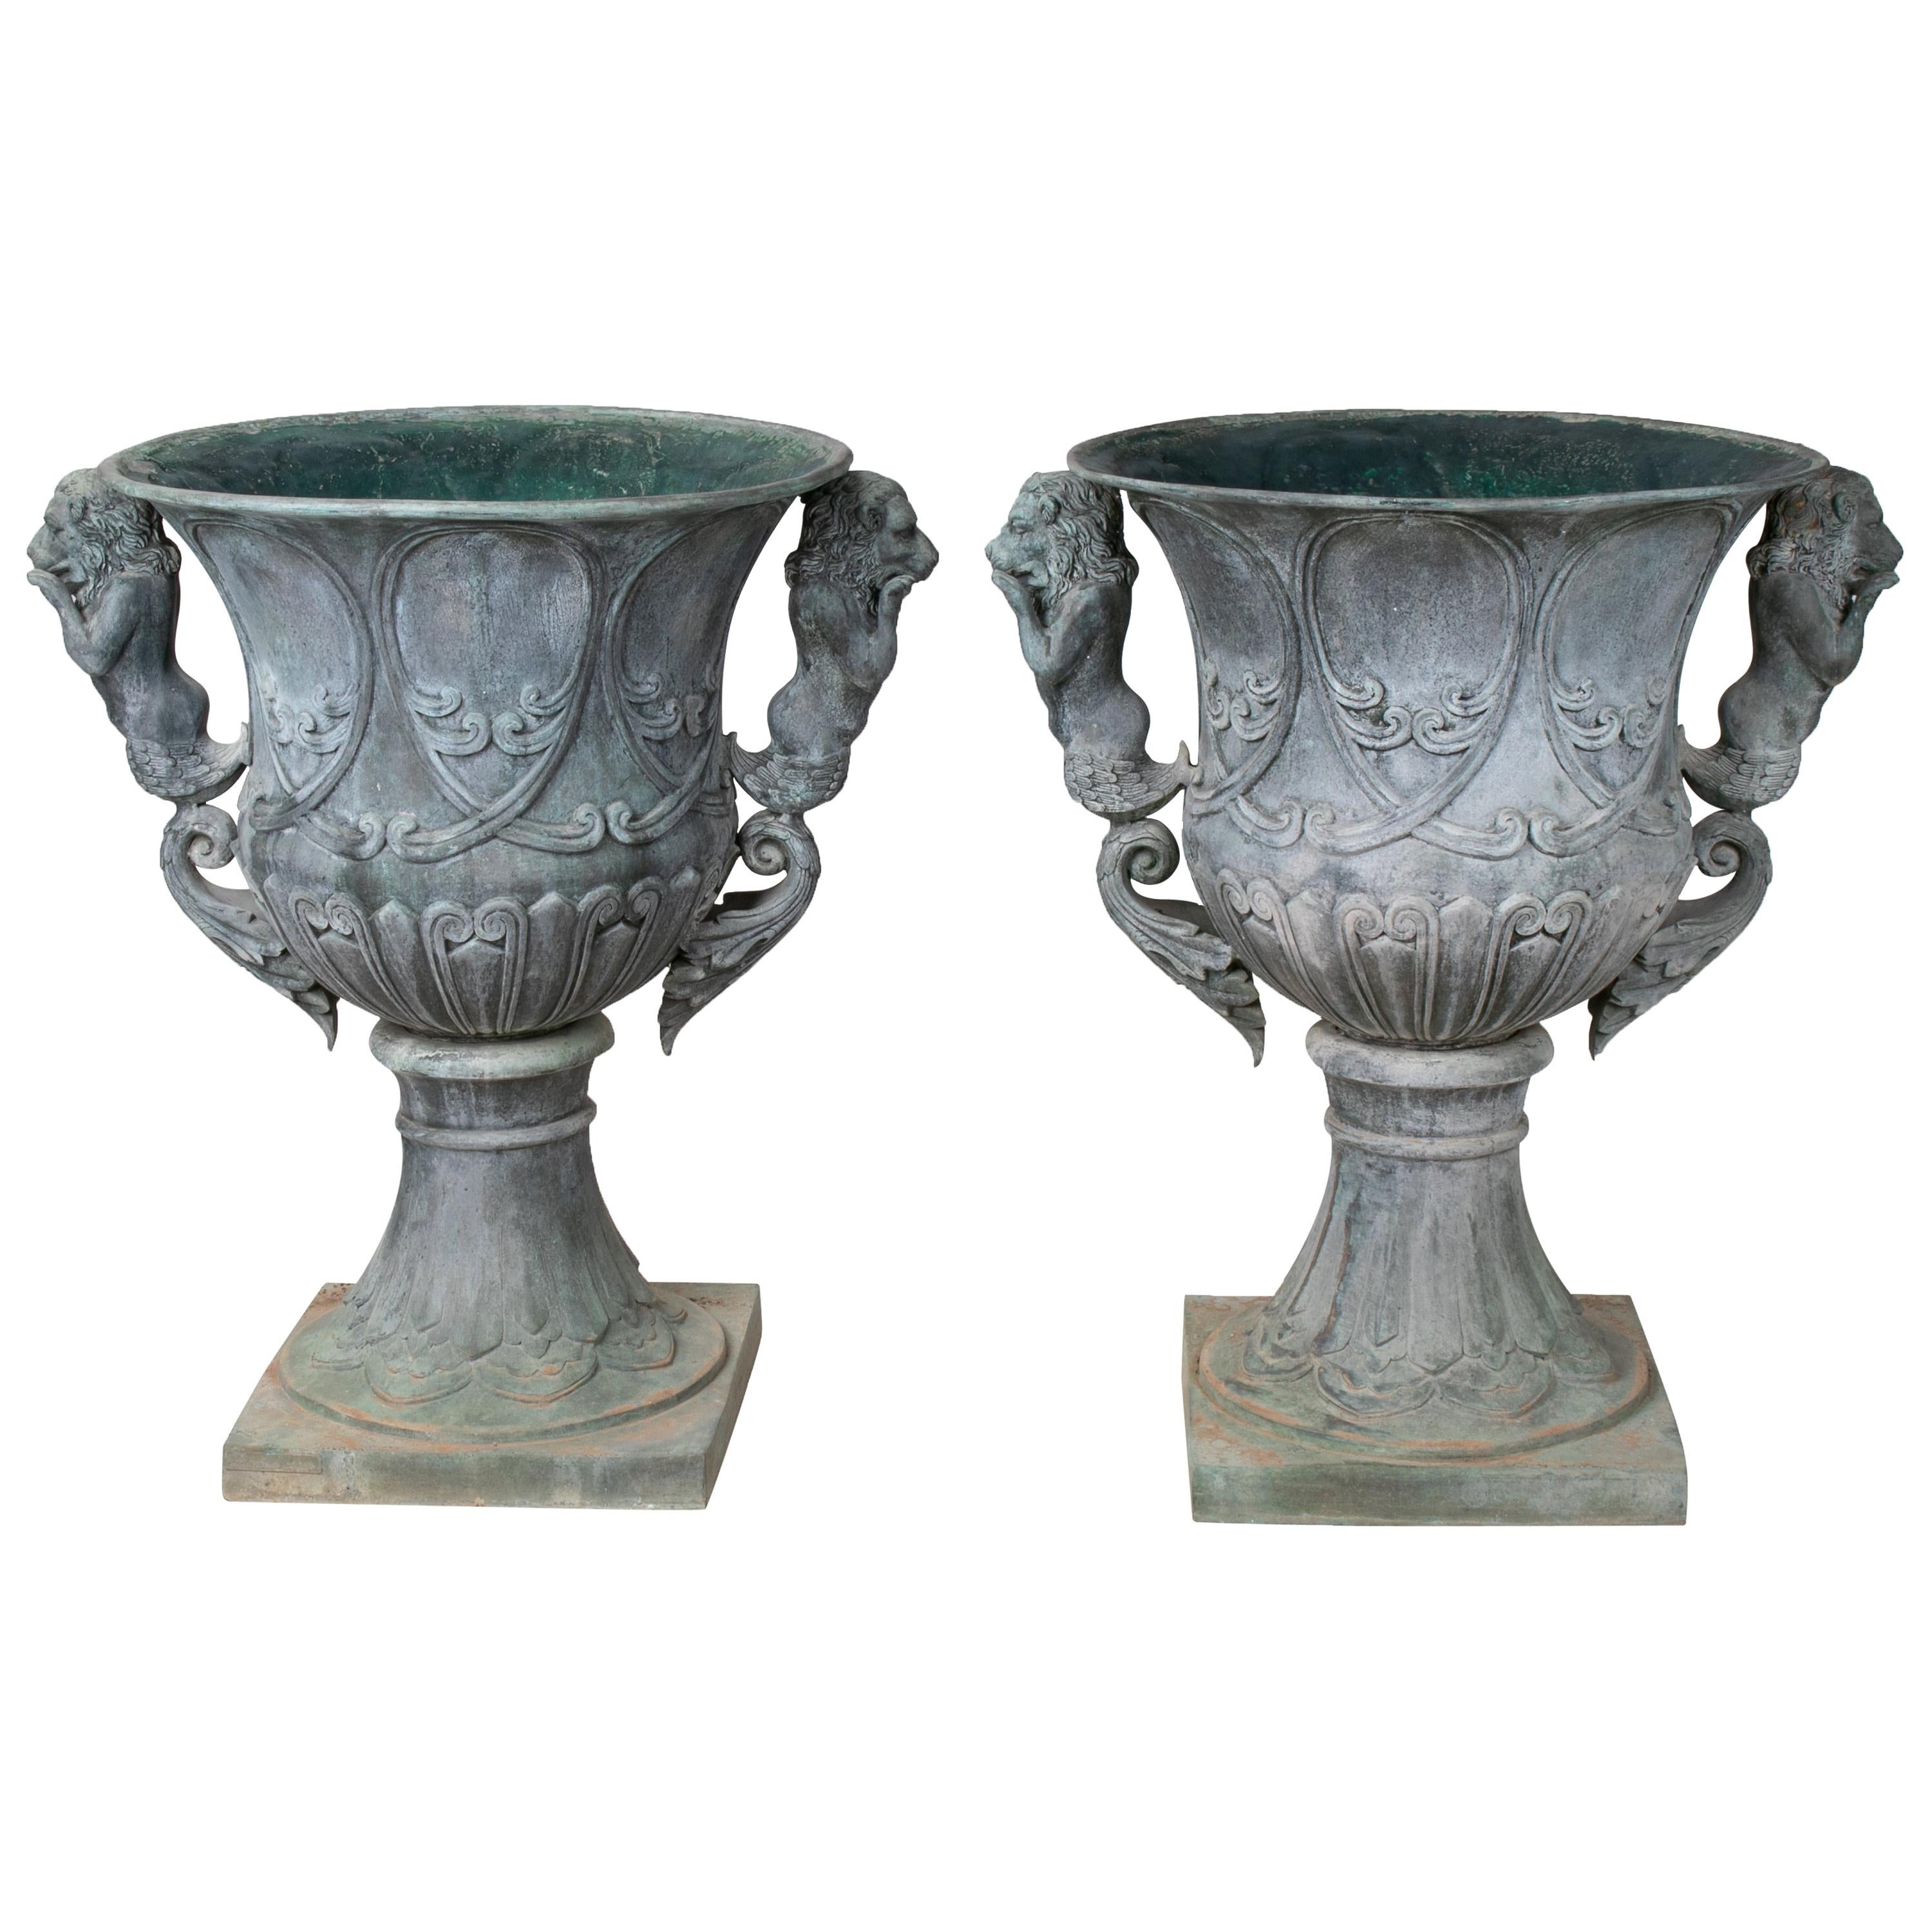 Pair of Bronze Garden Urns with Lions in Old Green Patina